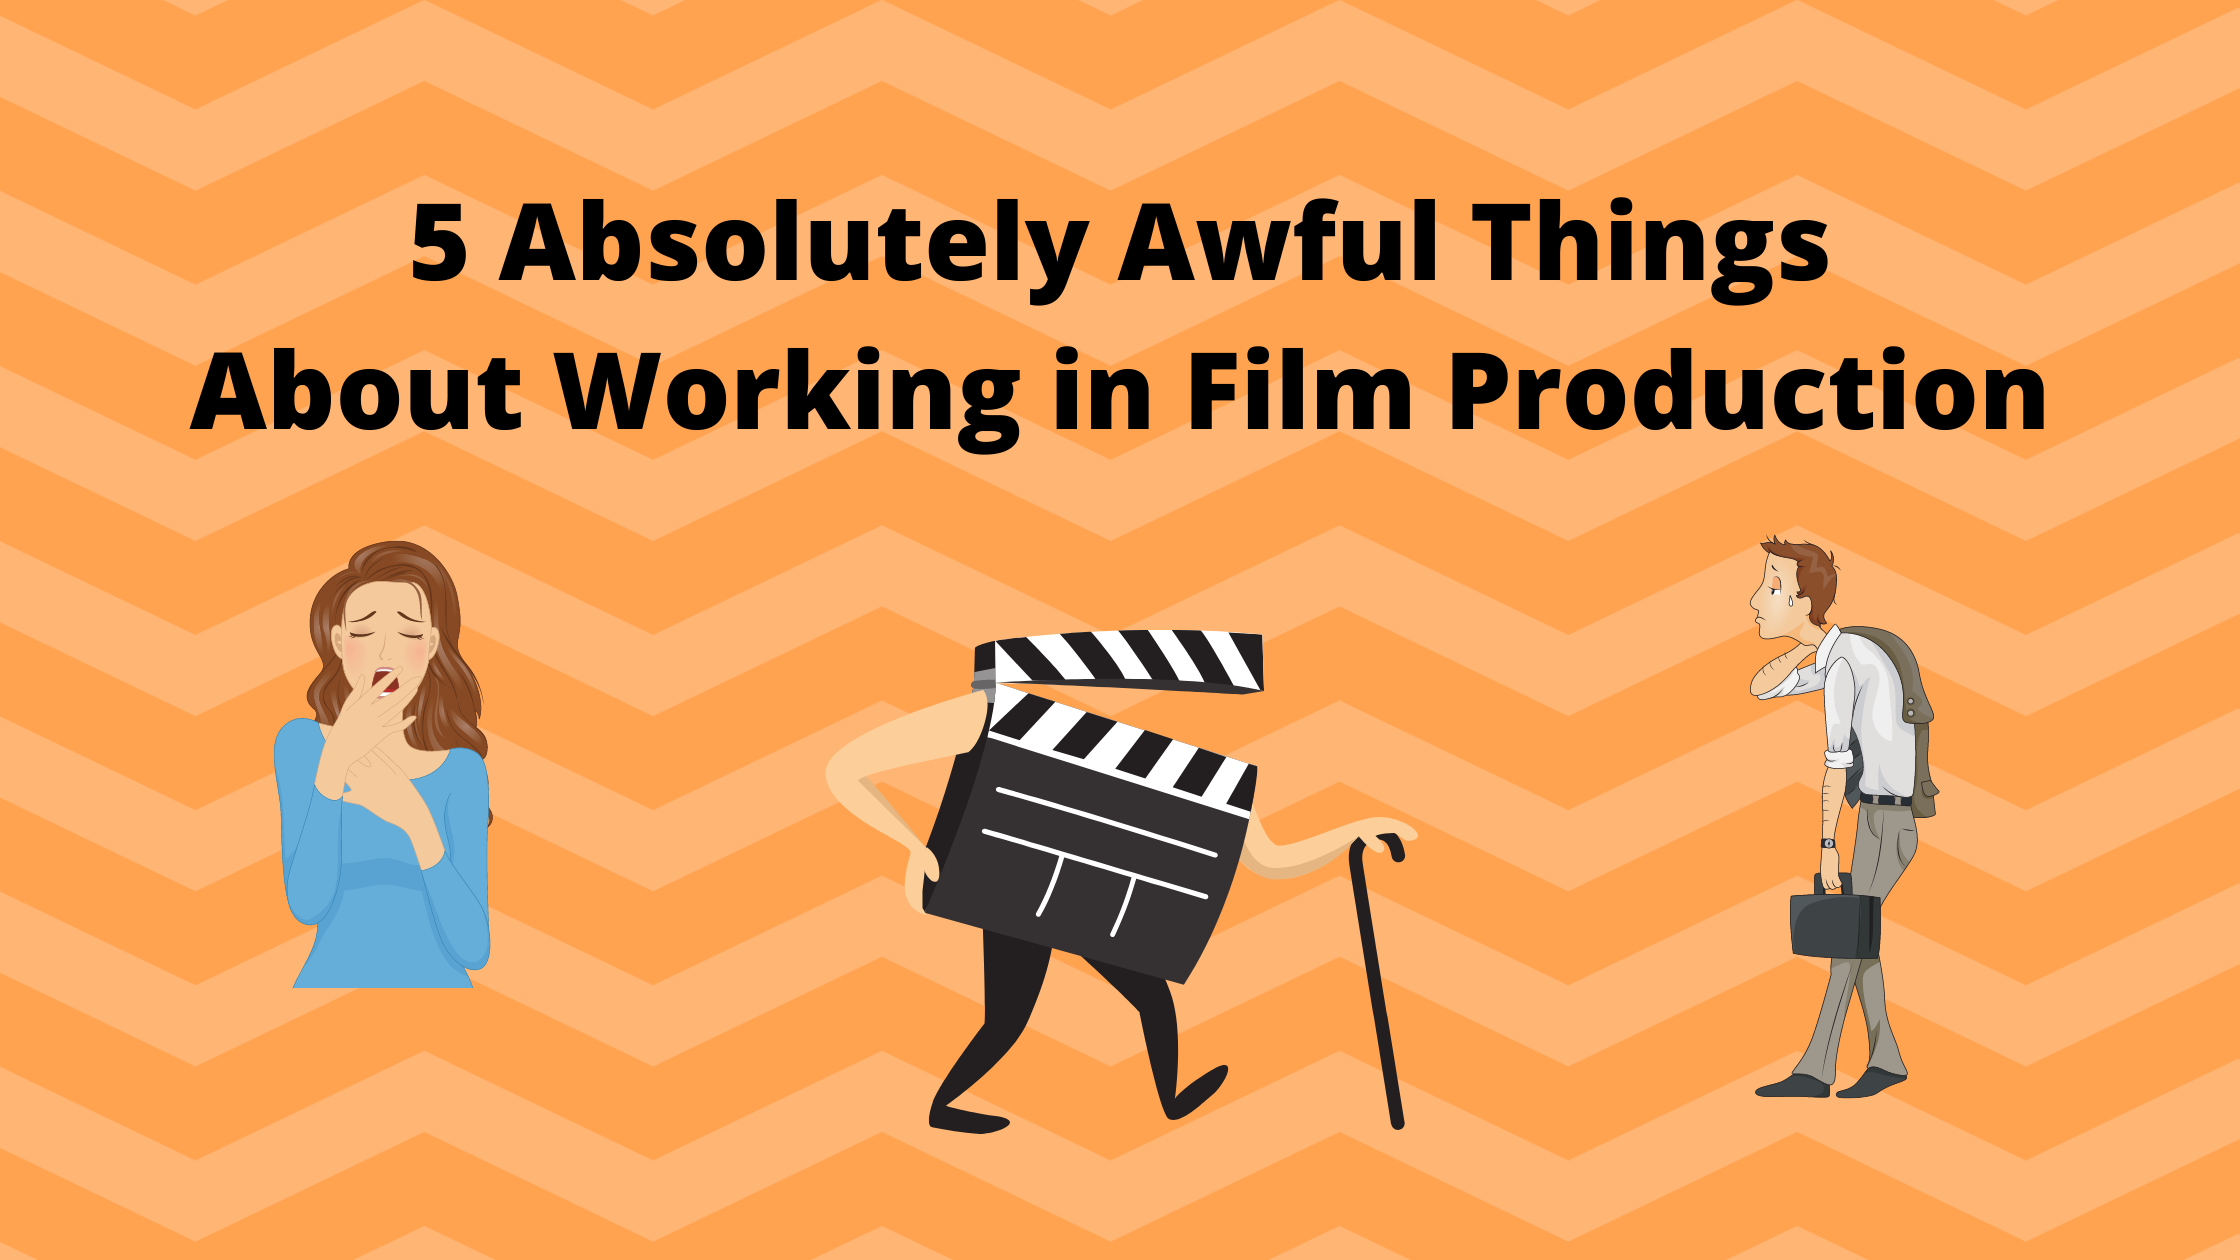 5 Absolutely Awful Things About Working in Film Production